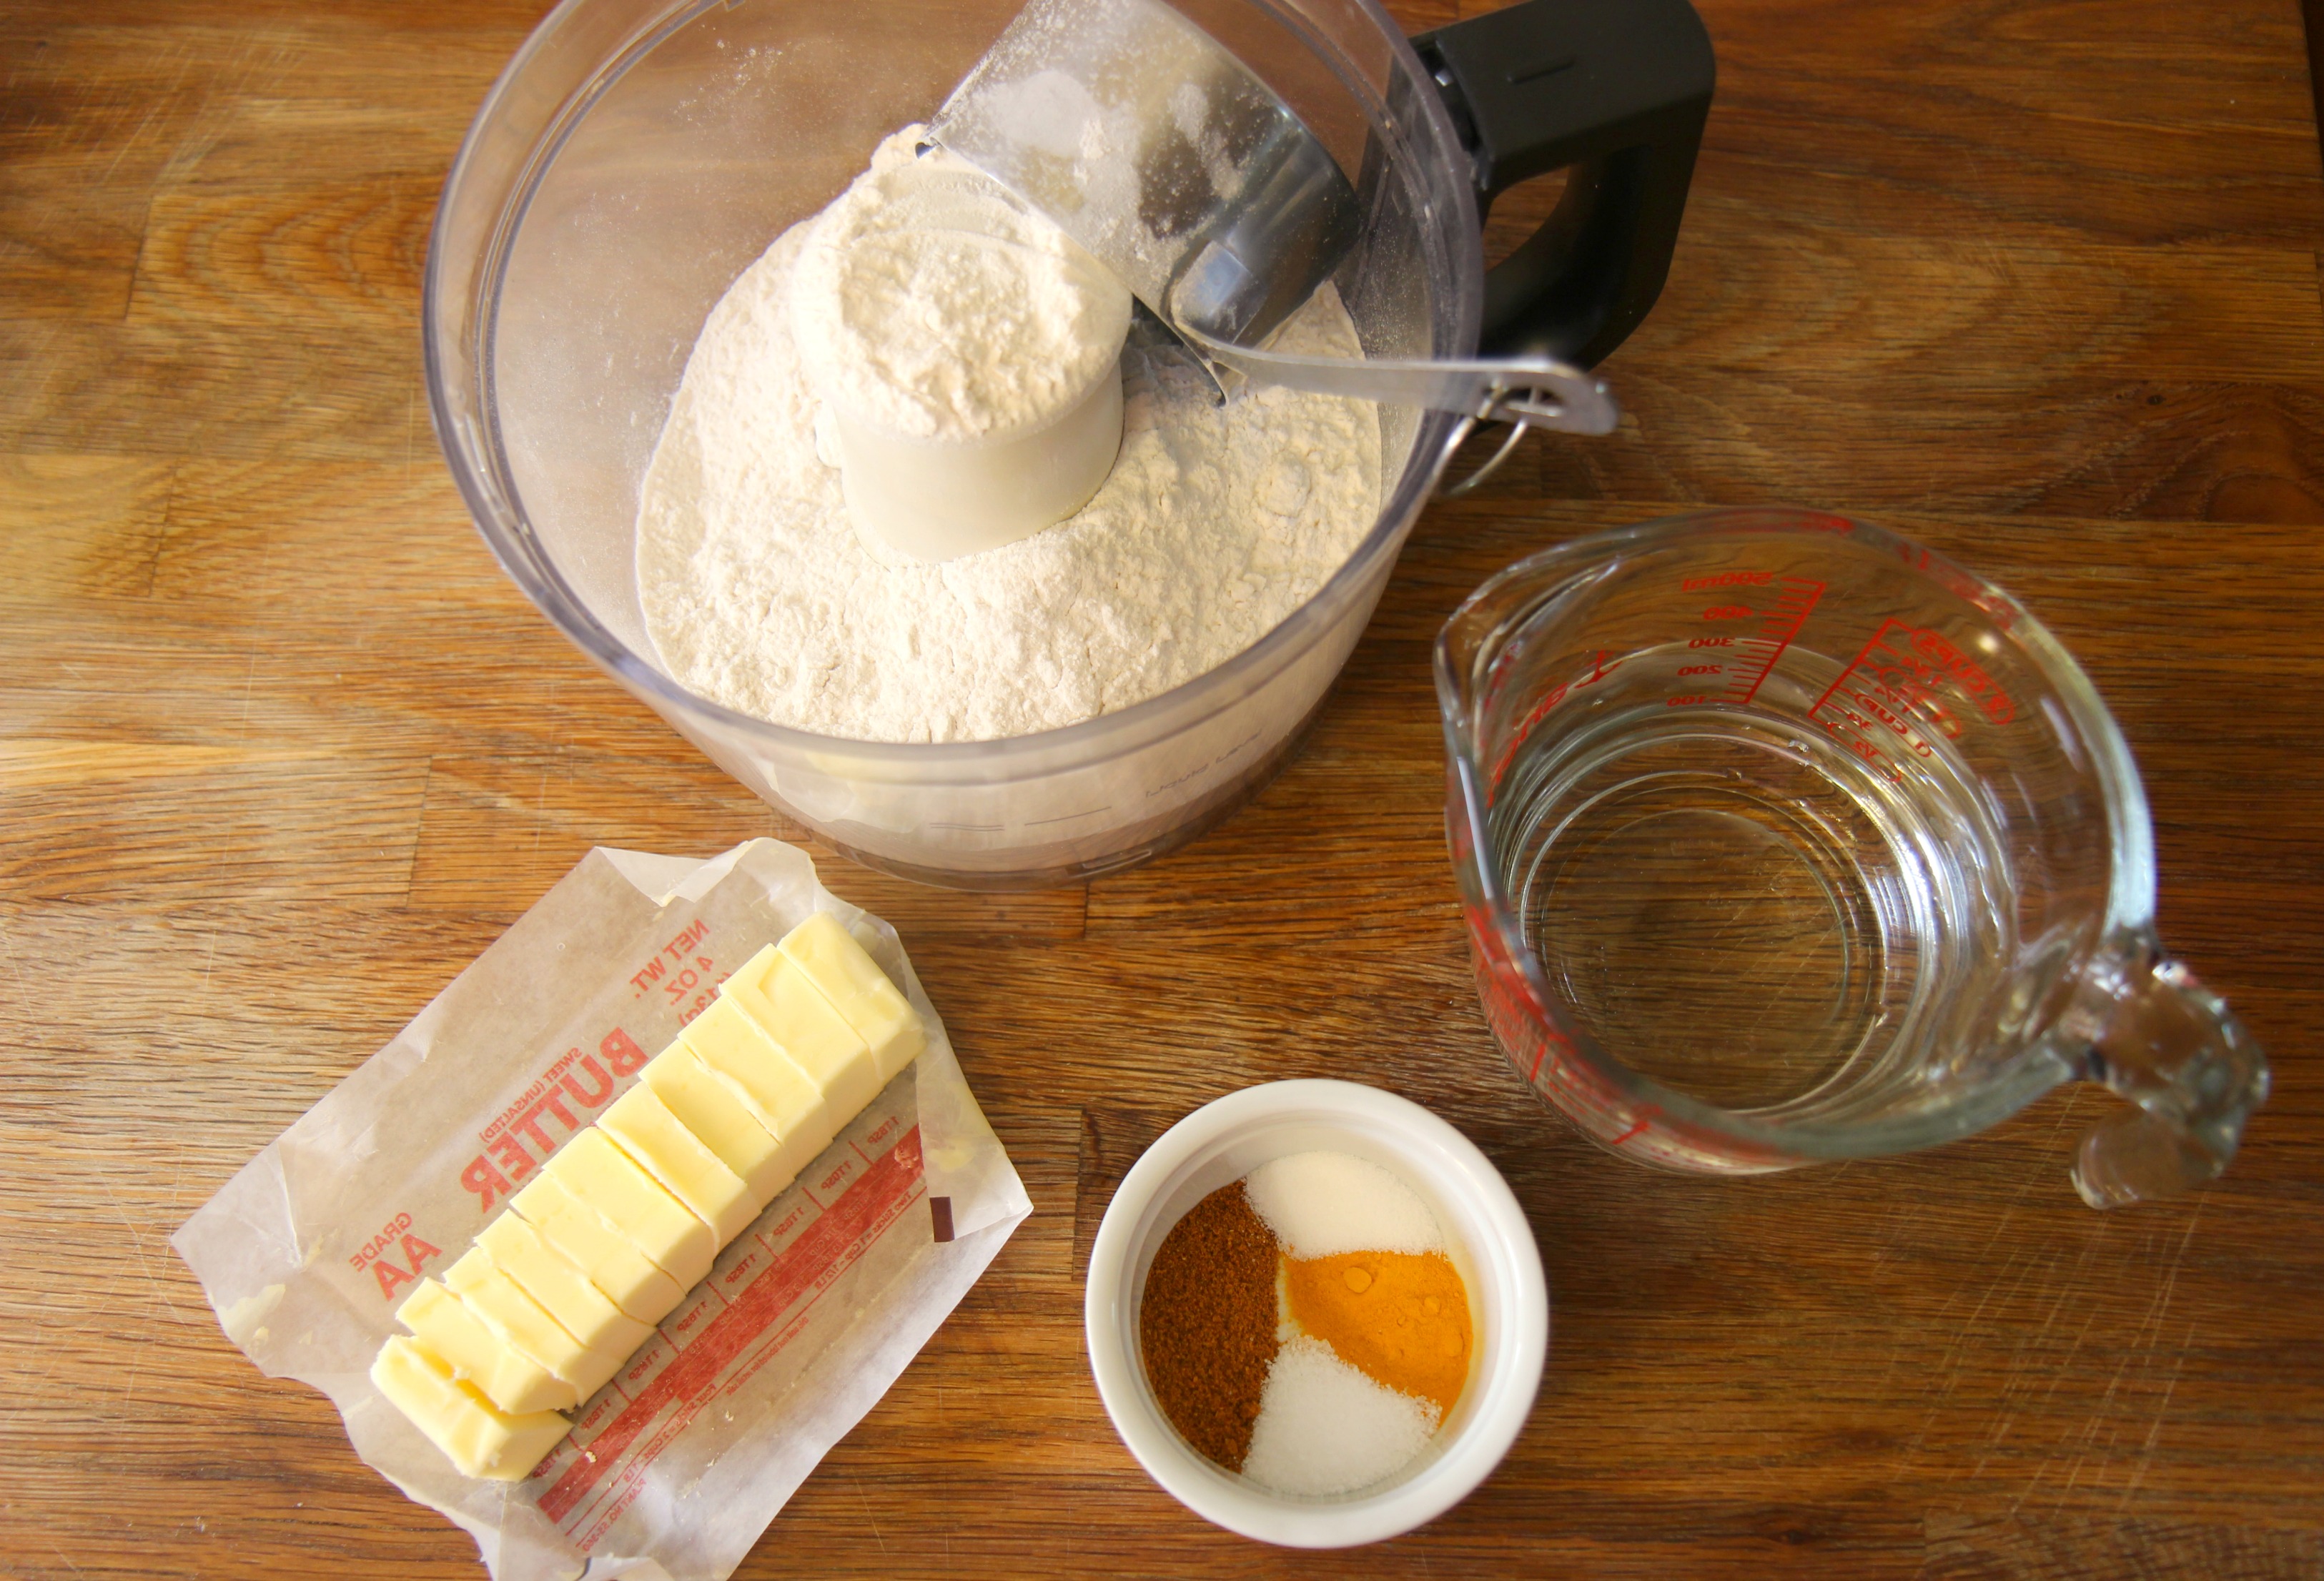 flour in a food processor, stick of butter, spices in a small ramekin, and a measuring cup with water. 